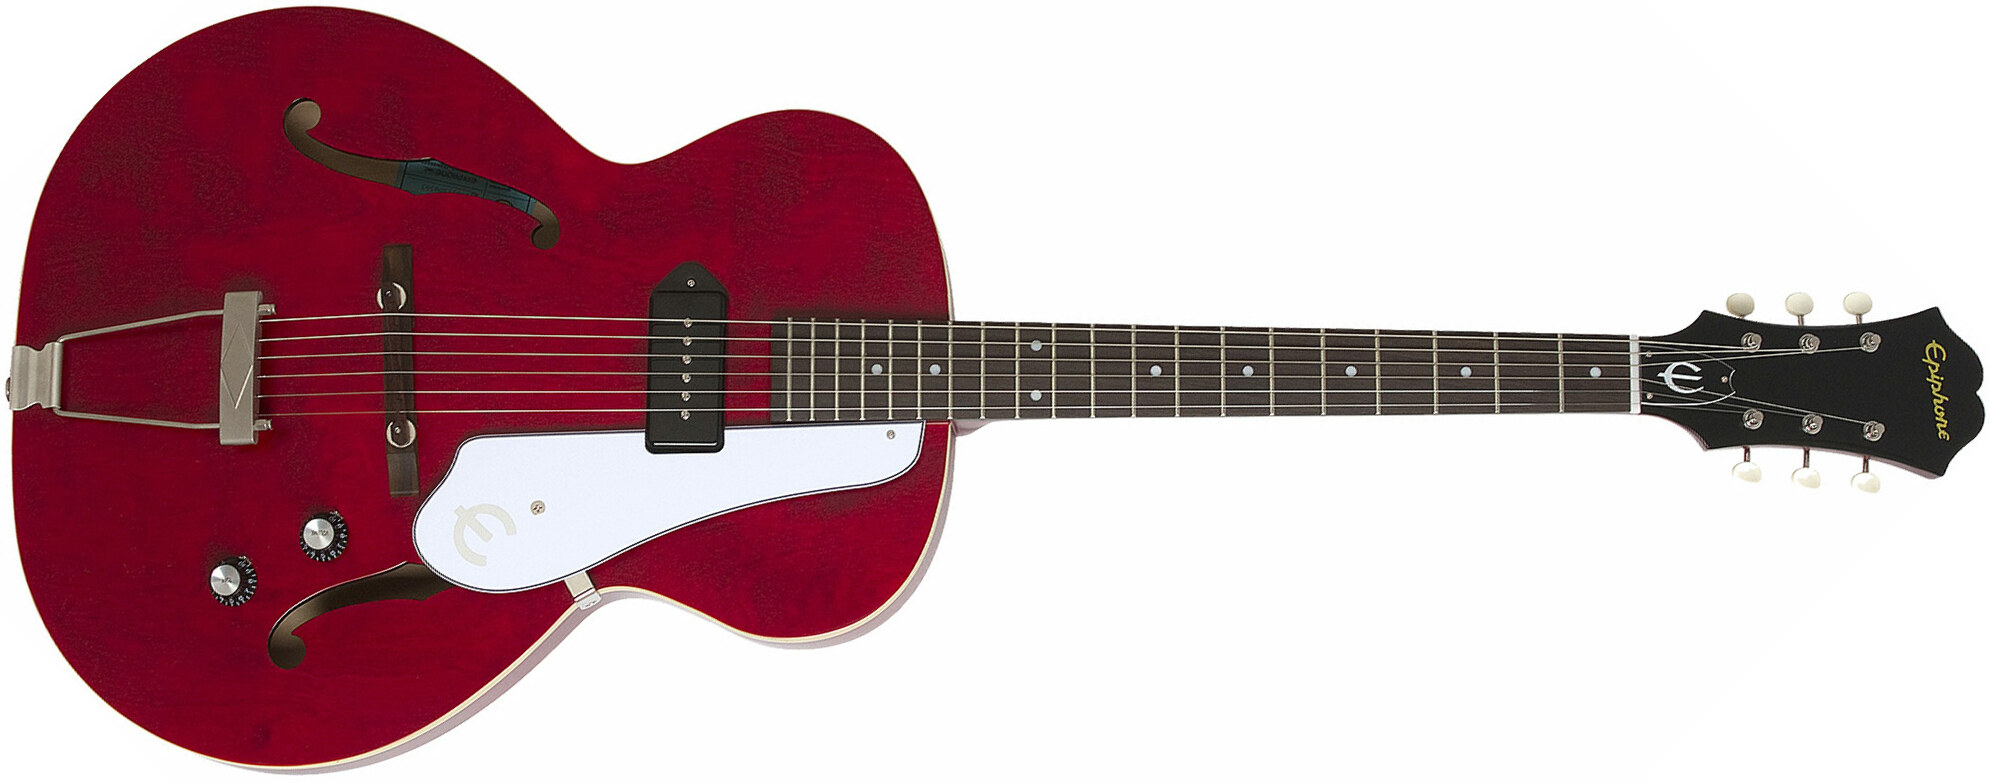 Epiphone Inspired By 1966 Century 2016 - Aged Gloss Cherry - Guitare Électrique 1/2 Caisse - Main picture